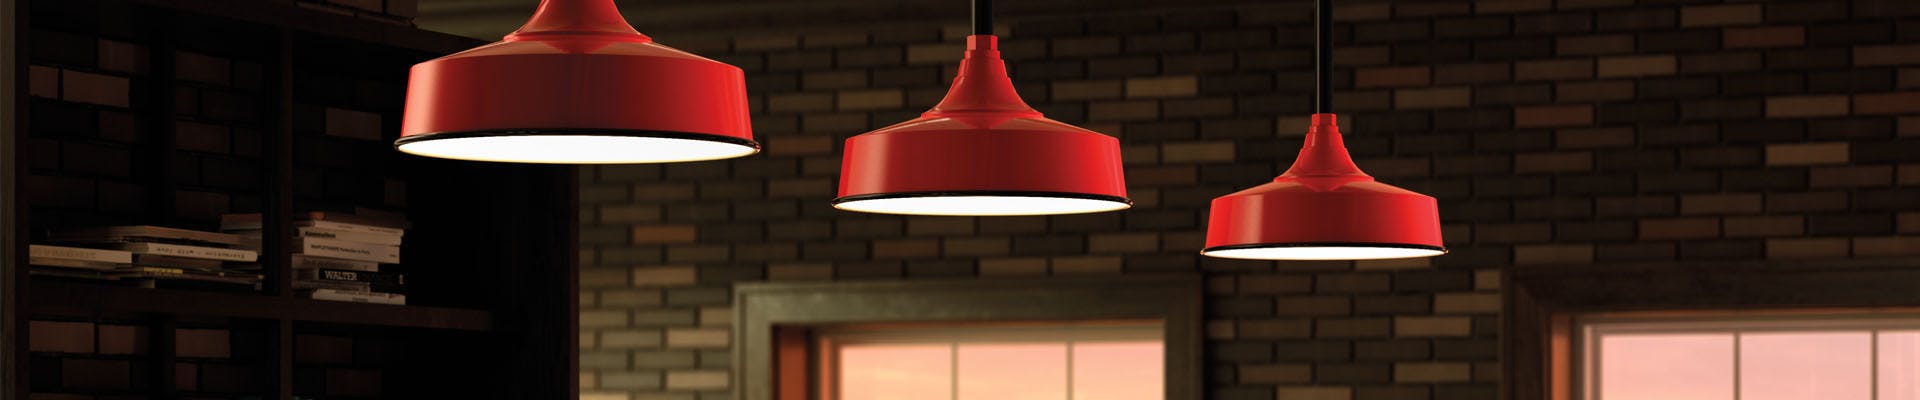 three red commercial lighting pendants hanging in front of a brick wall